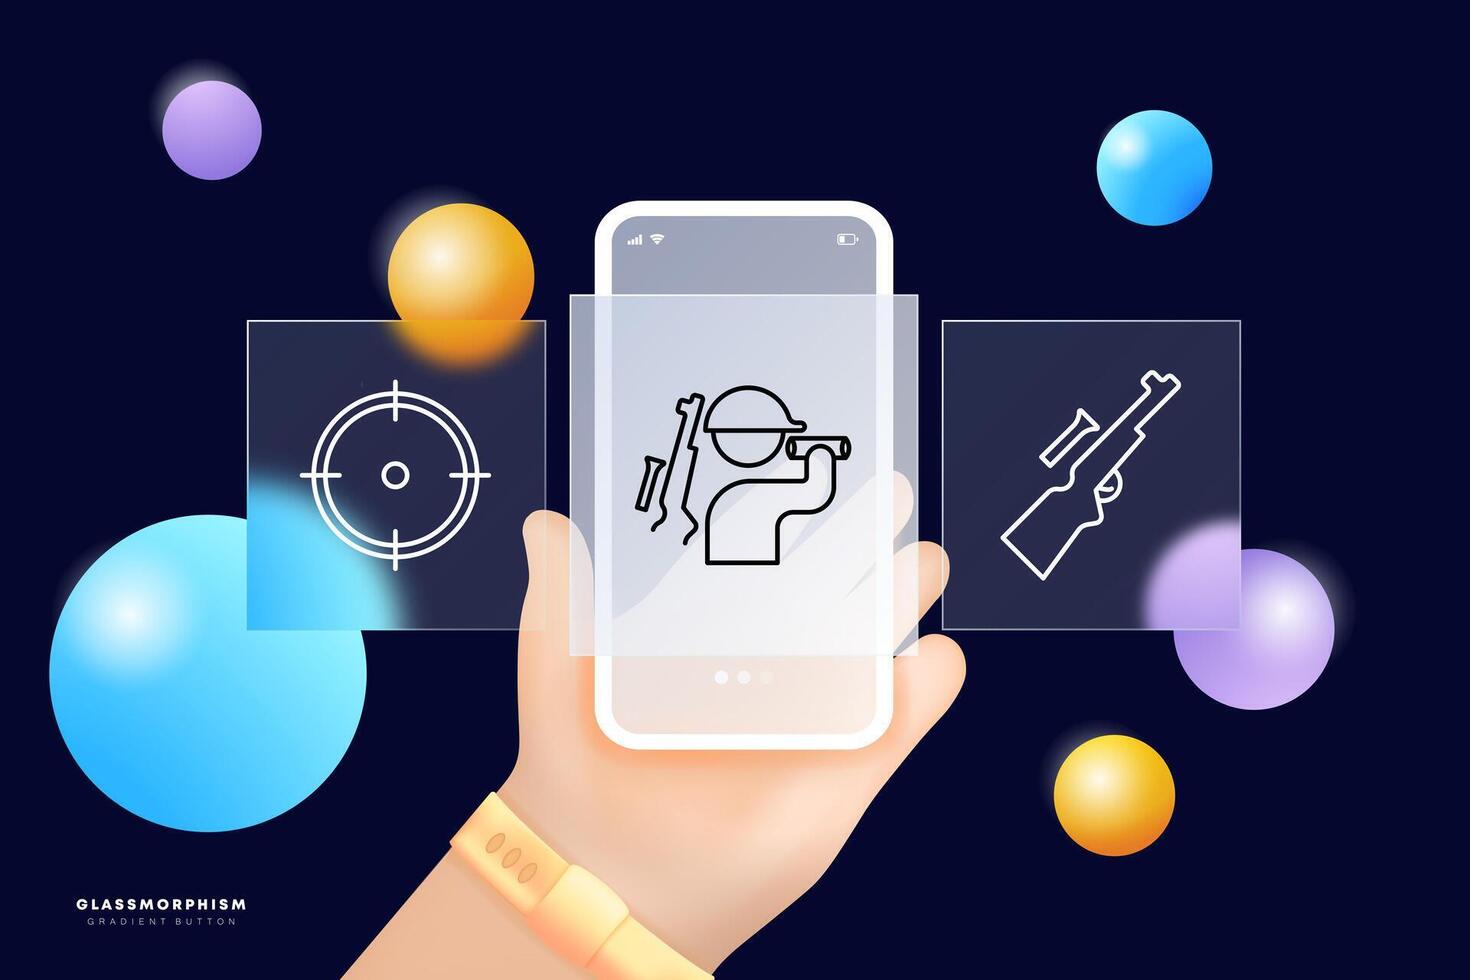 Shoot set icon. Sight, crosshair, man, silhouette, hunter, rifle. trigger, phone, glass, balls, hand. Concept of hunting and chasing. Glassmorphism style. vector